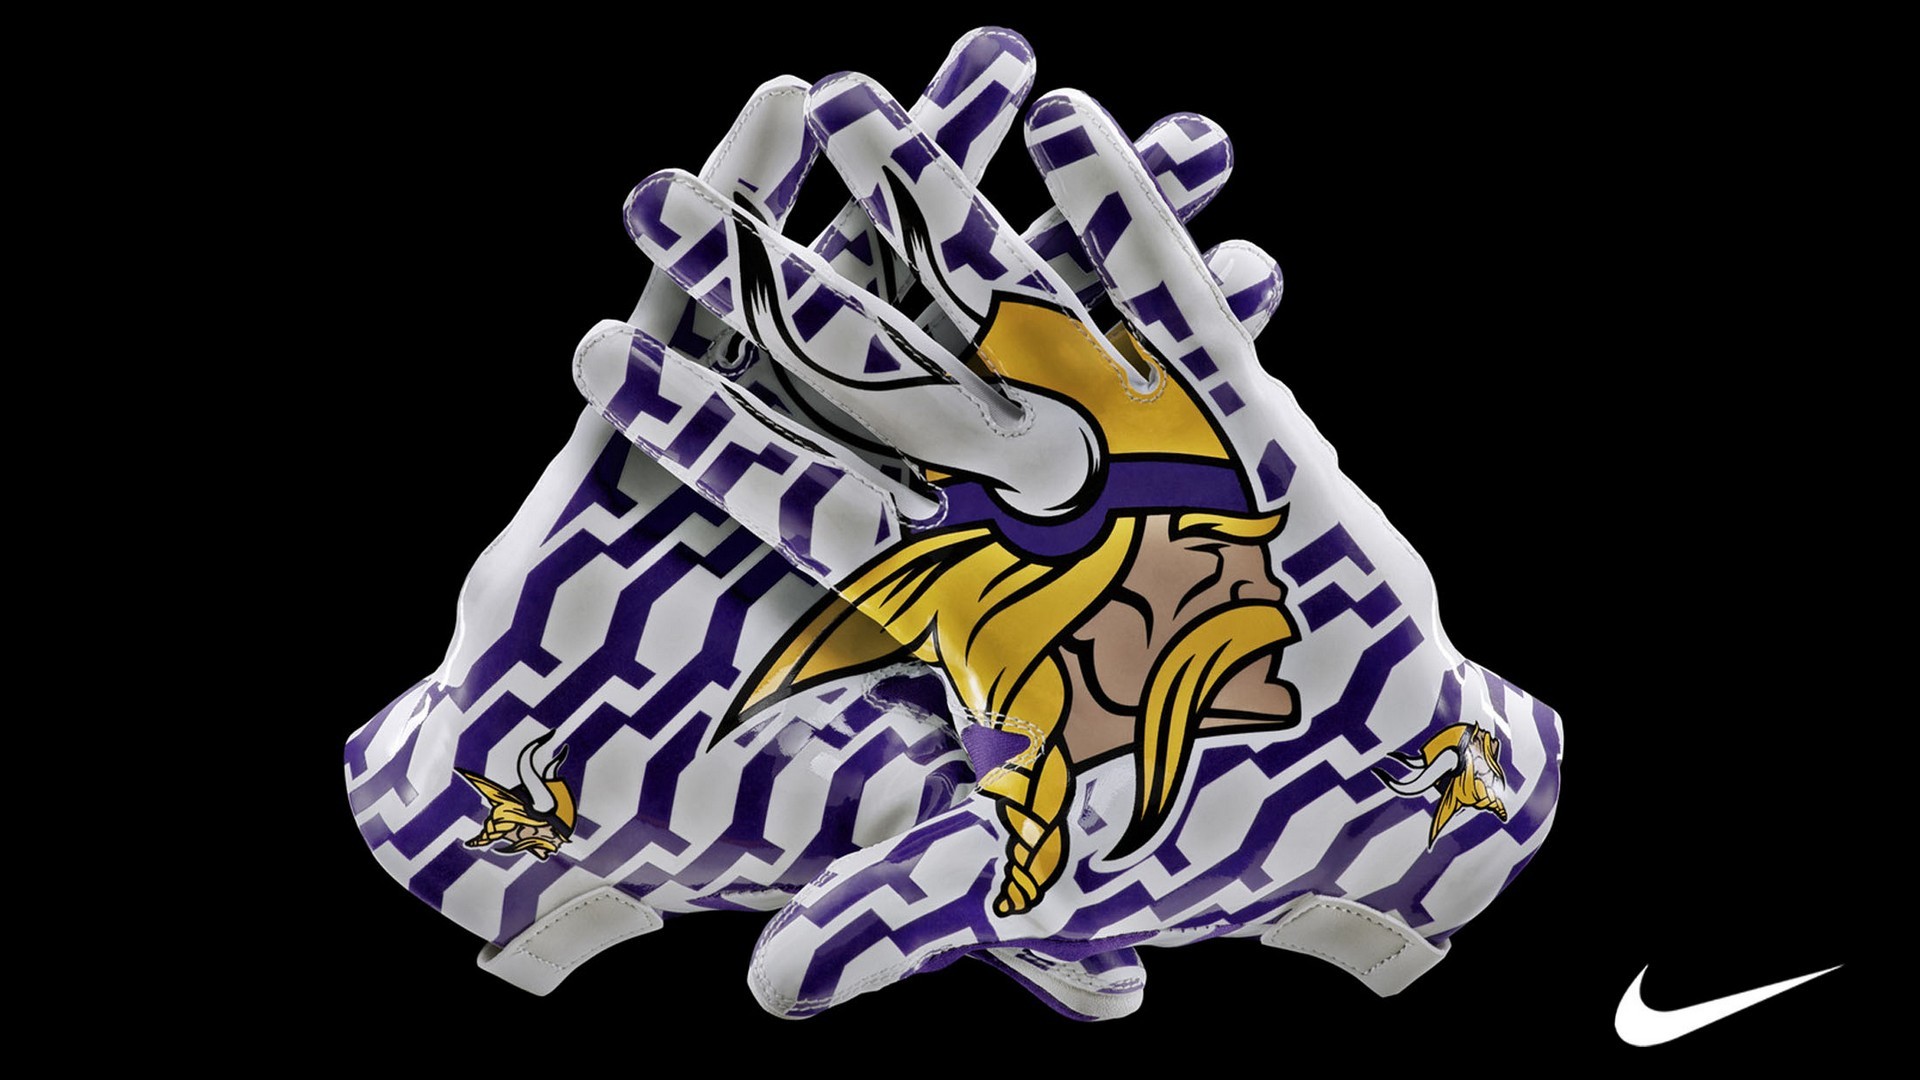 Minnesota Vikings NFL For Desktop Wallpaper With high-resolution 1920X1080 pixel. You can use this wallpaper for your Mac or Windows Desktop Background, iPhone, Android or Tablet and another Smartphone device